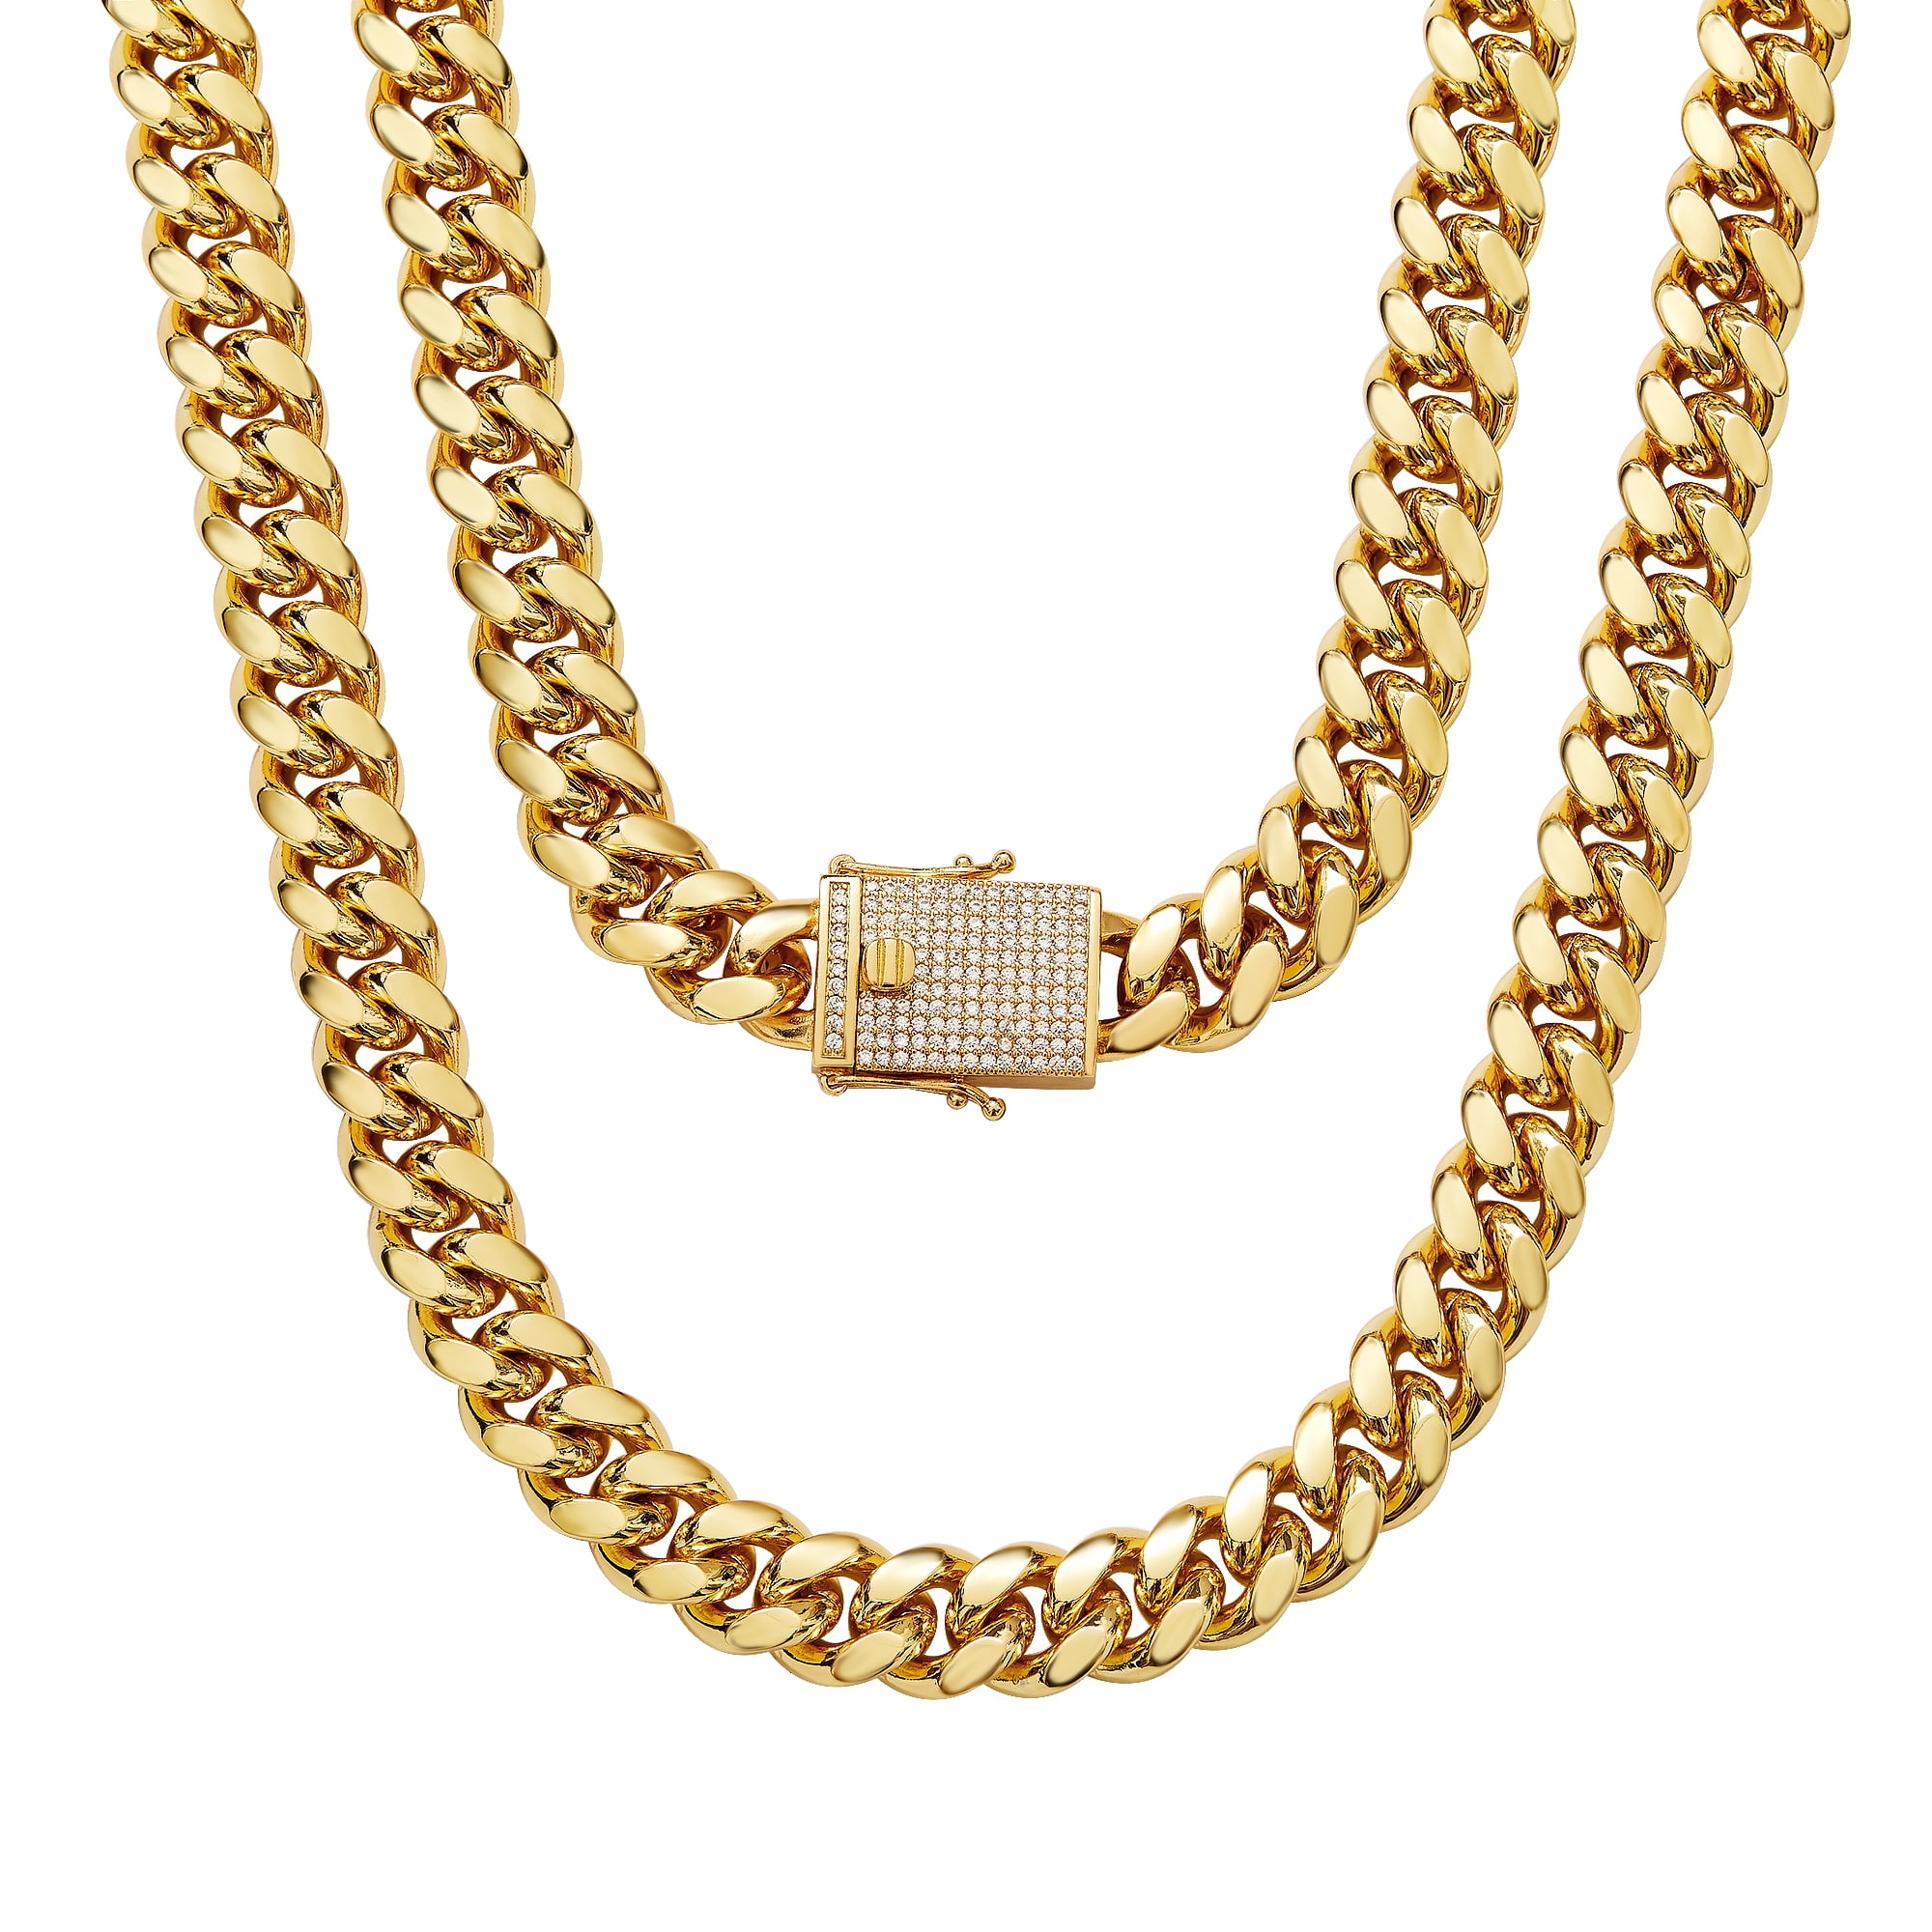 14K Gold IP Top Quality 200 Carat Flawless CZ Iced Out Chain Necklace